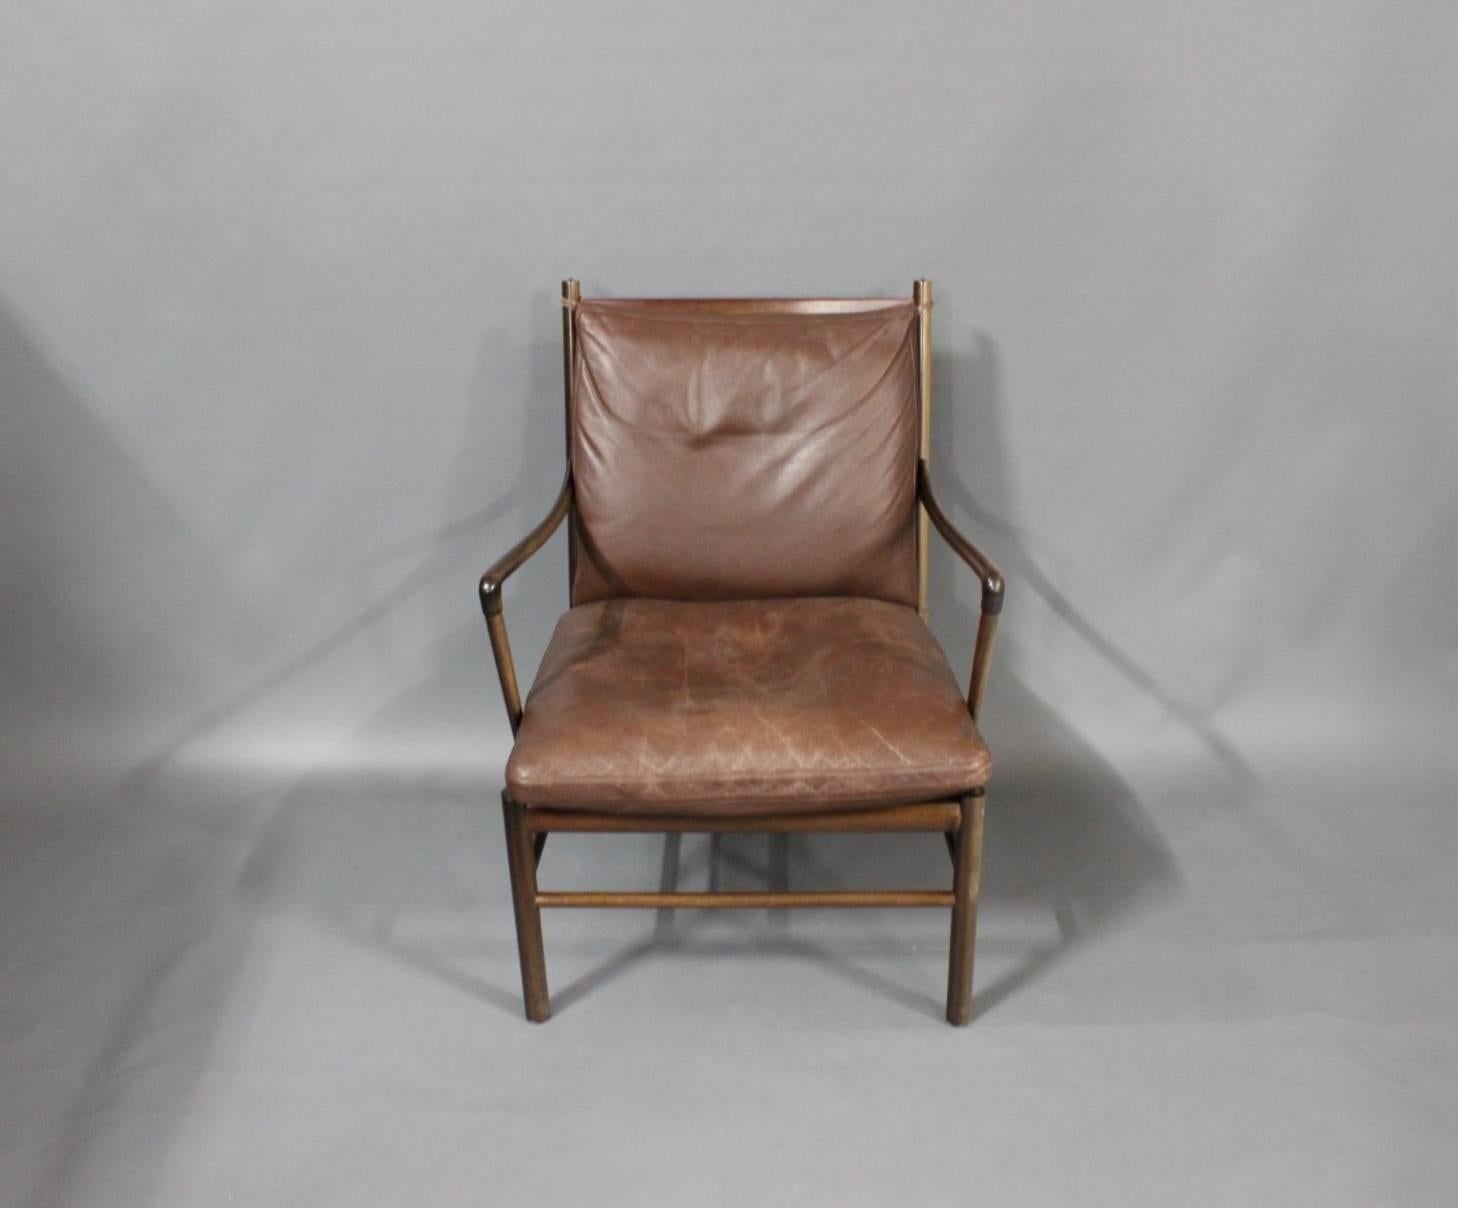 Colonial Chair, model PJ 149 designed by Ole Wanscher in 1949 and manufactured by P. Jeppesen. The chair is in mahogany and with Brown leather cushions. 
A matching ottoman is also available for purchase. 